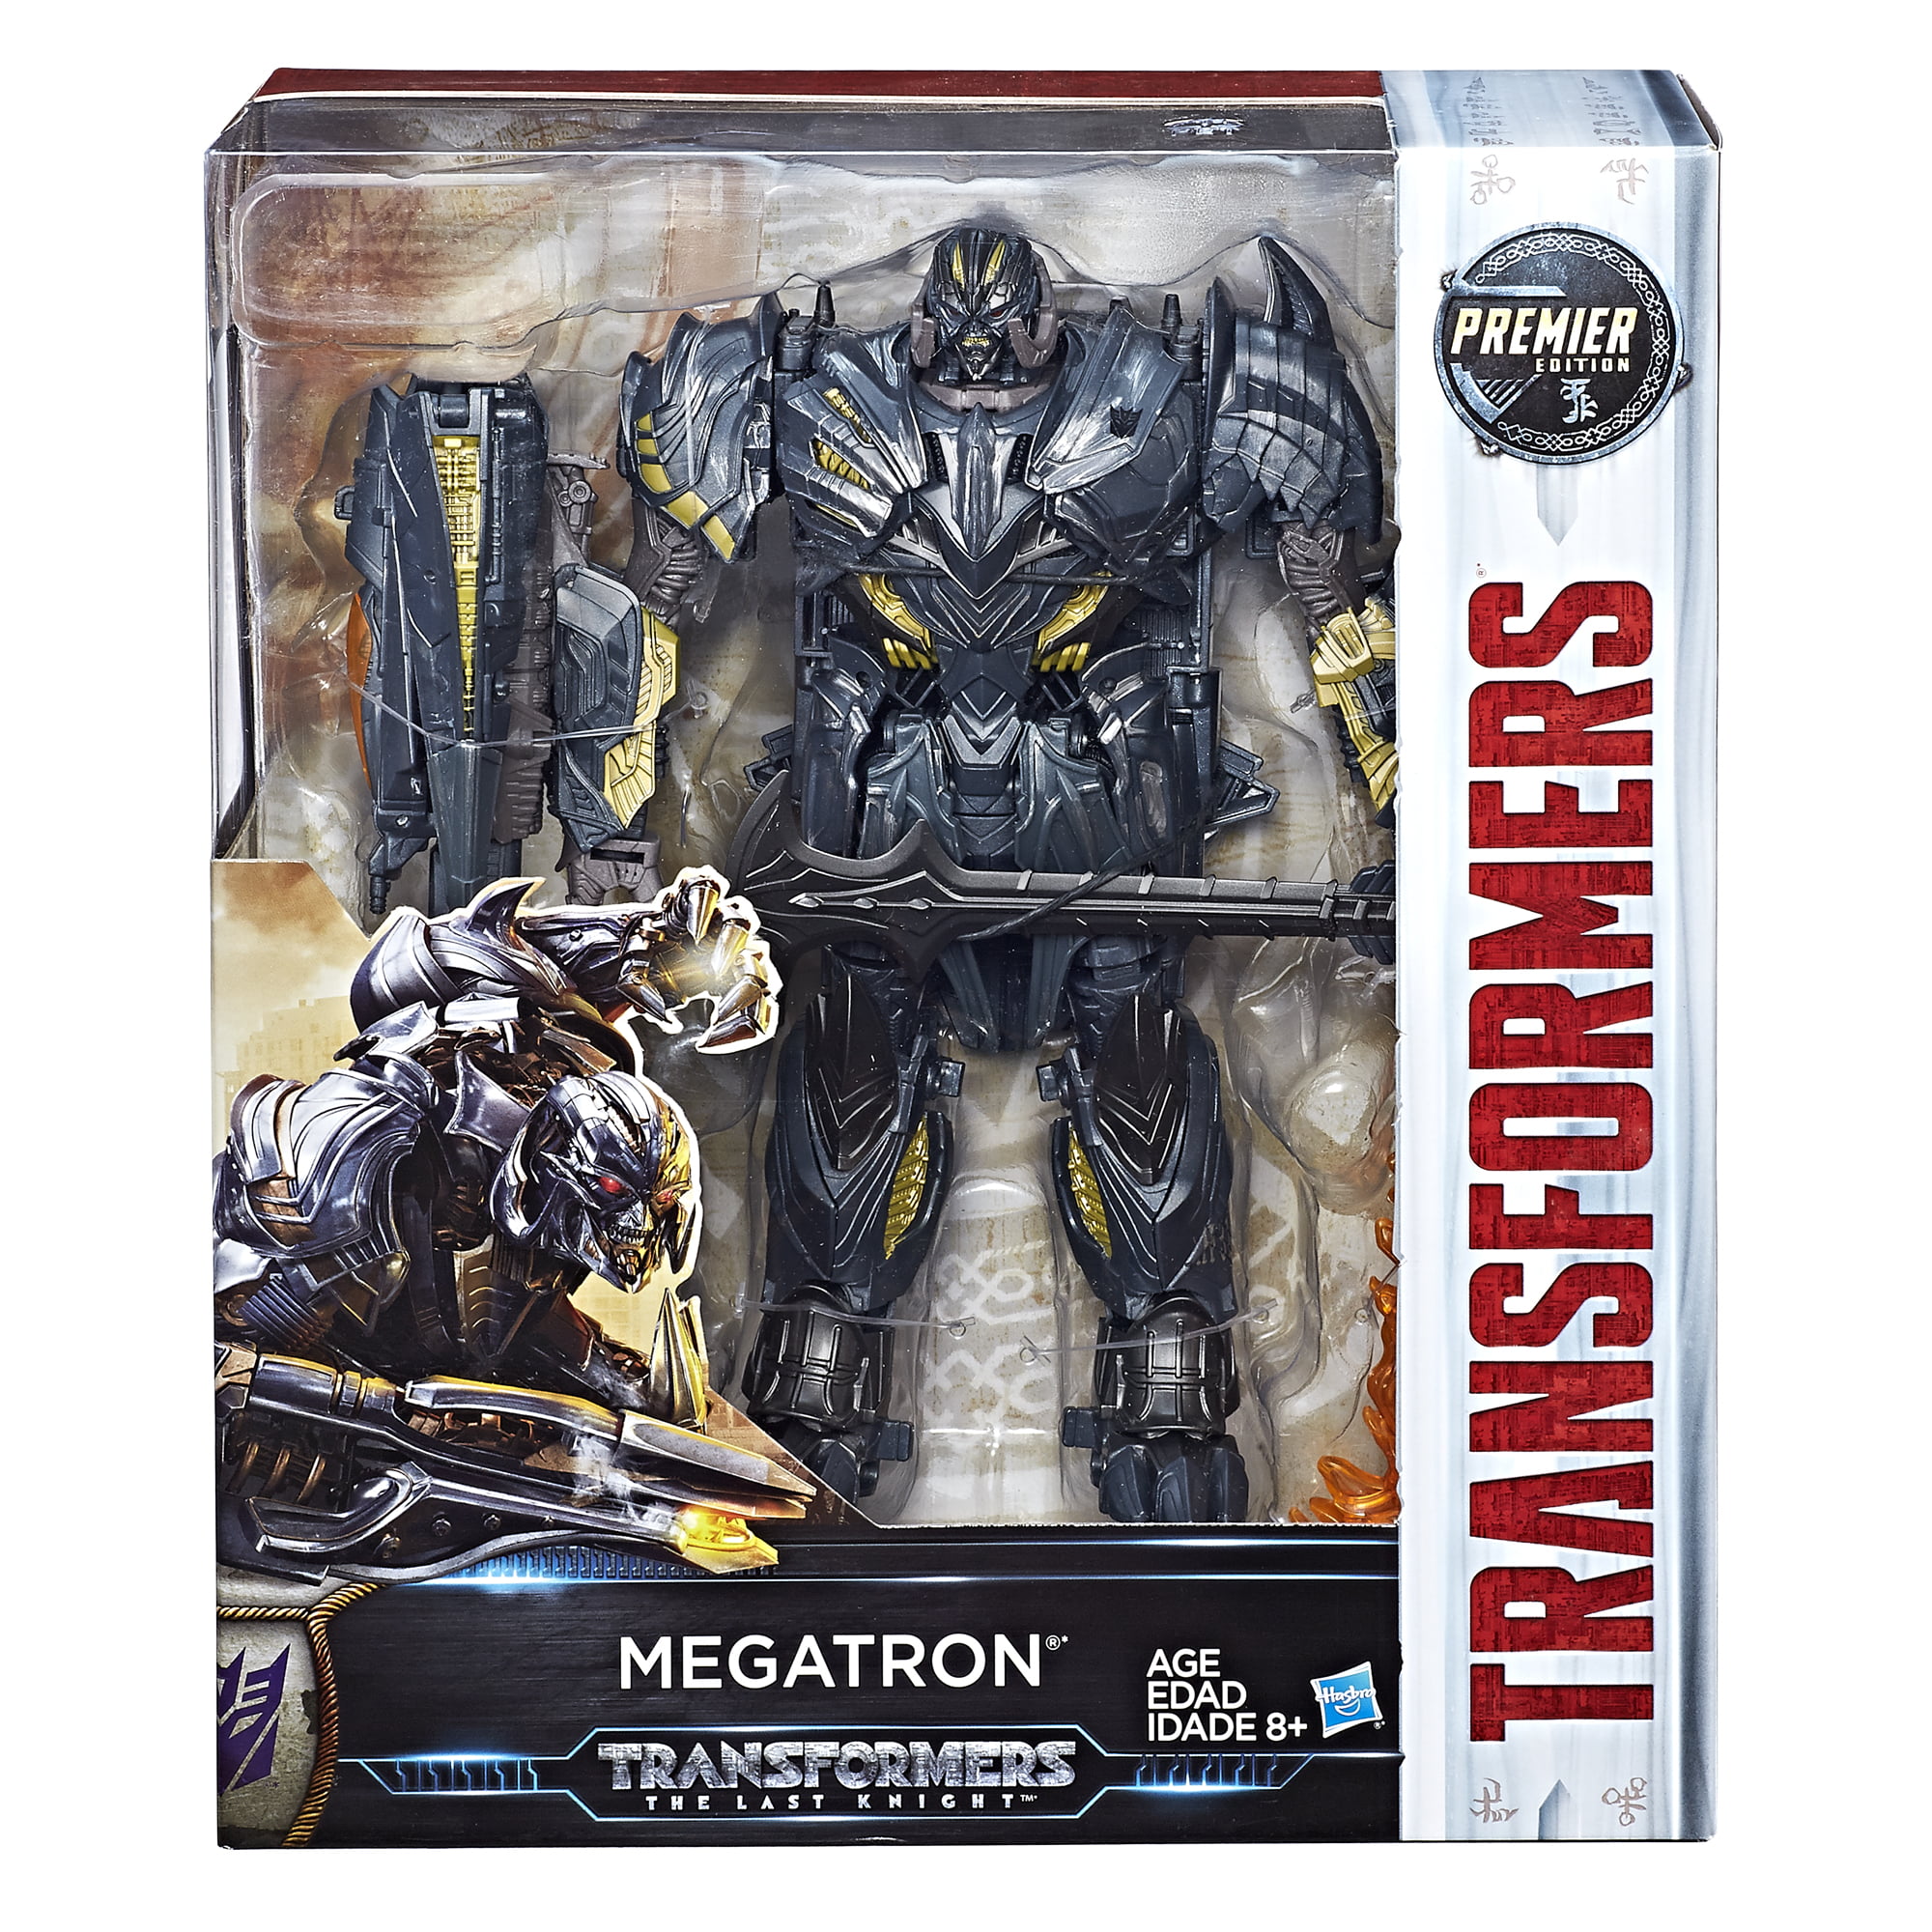 Transformers The Last Knight Premier Edition Voyager Class MEGATRON by Hasbro 